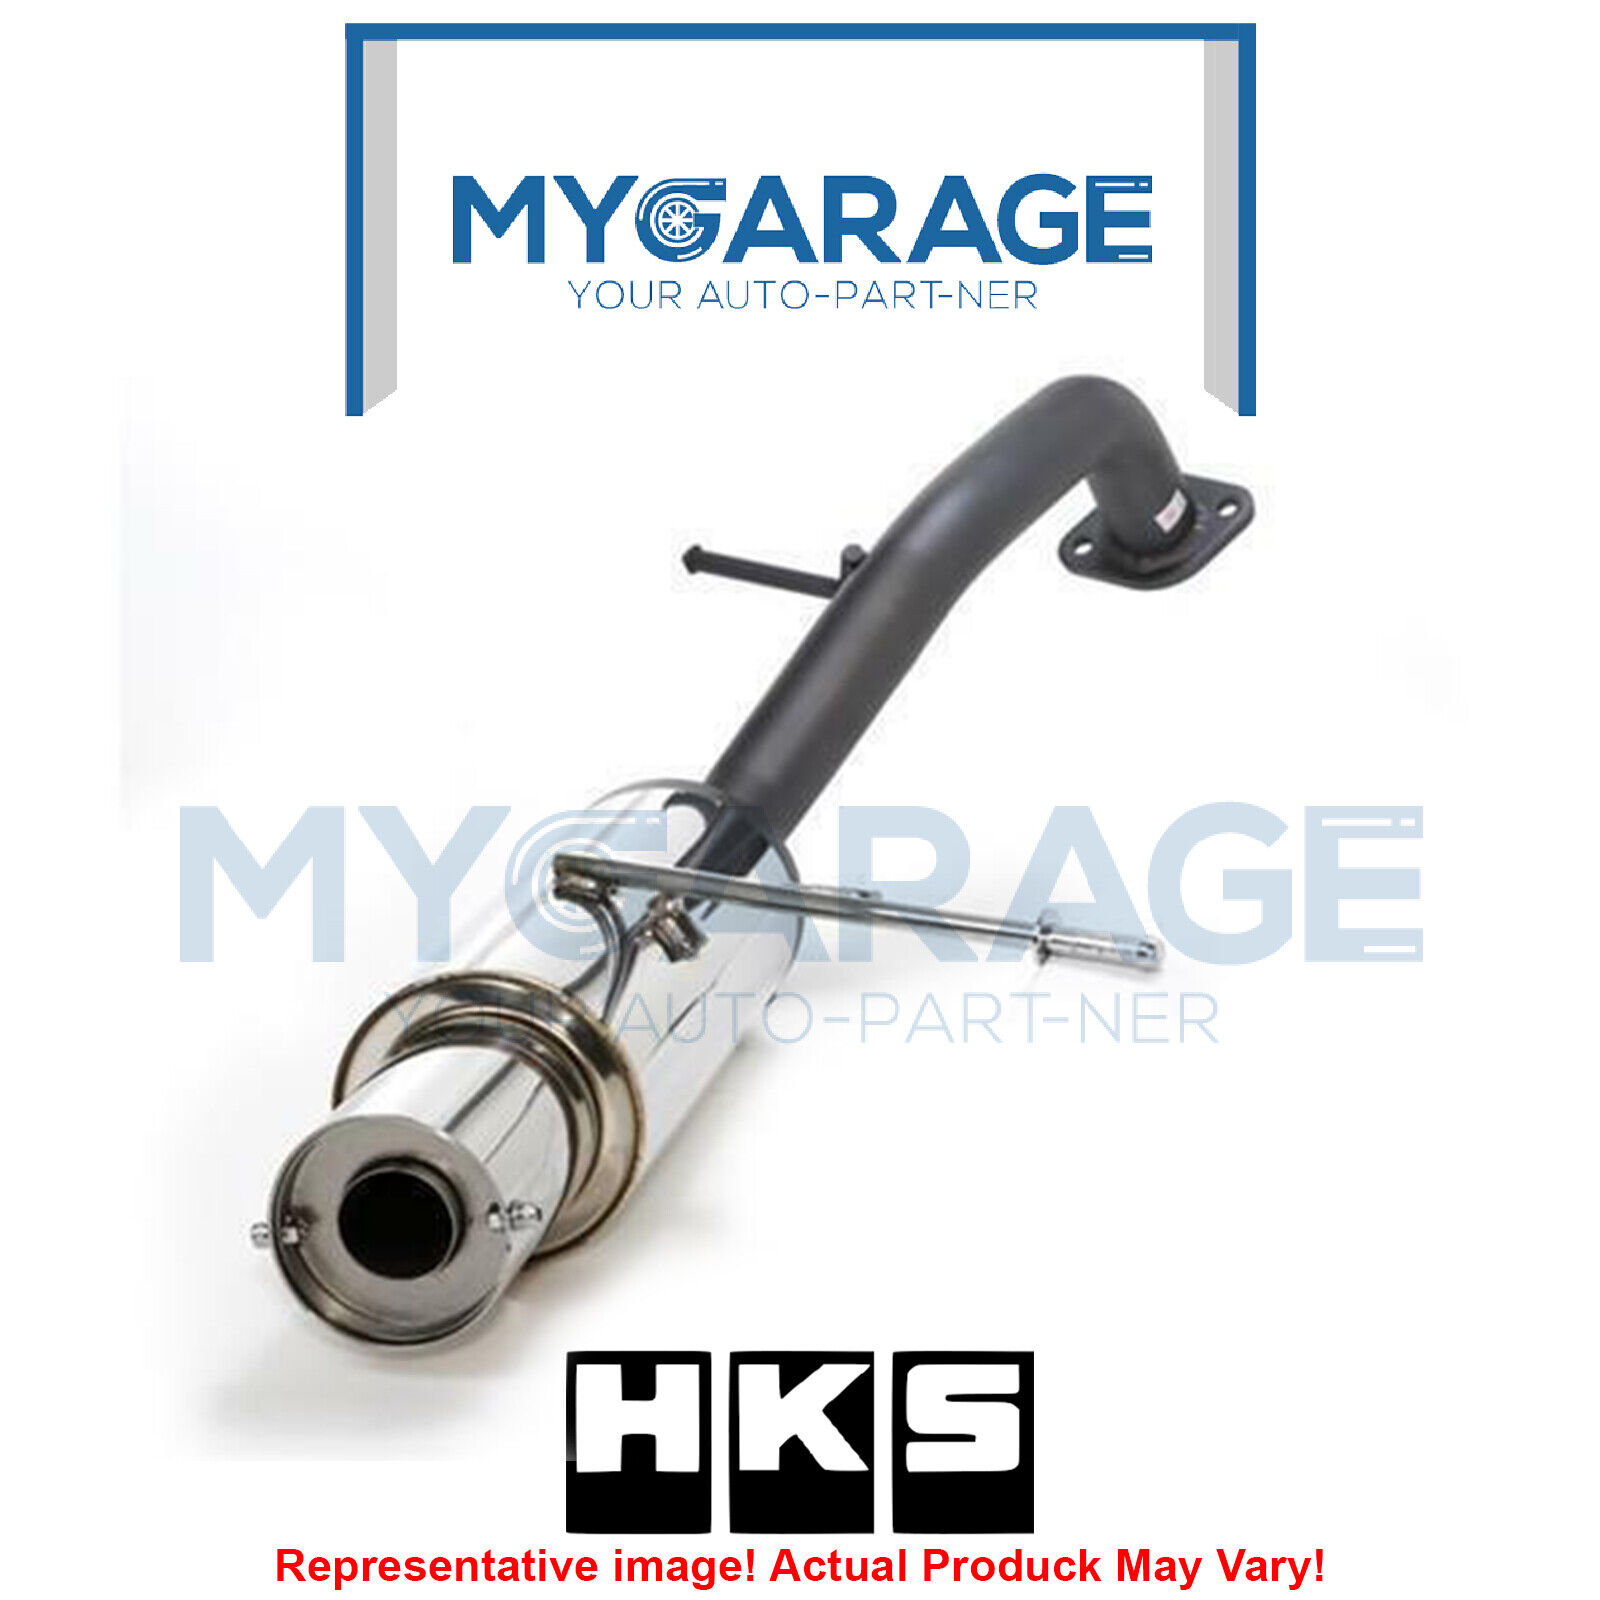 HKS Hi-Power 304 SS Rear Section Exhaust System for 01-03 MAZDA PROTEGE5